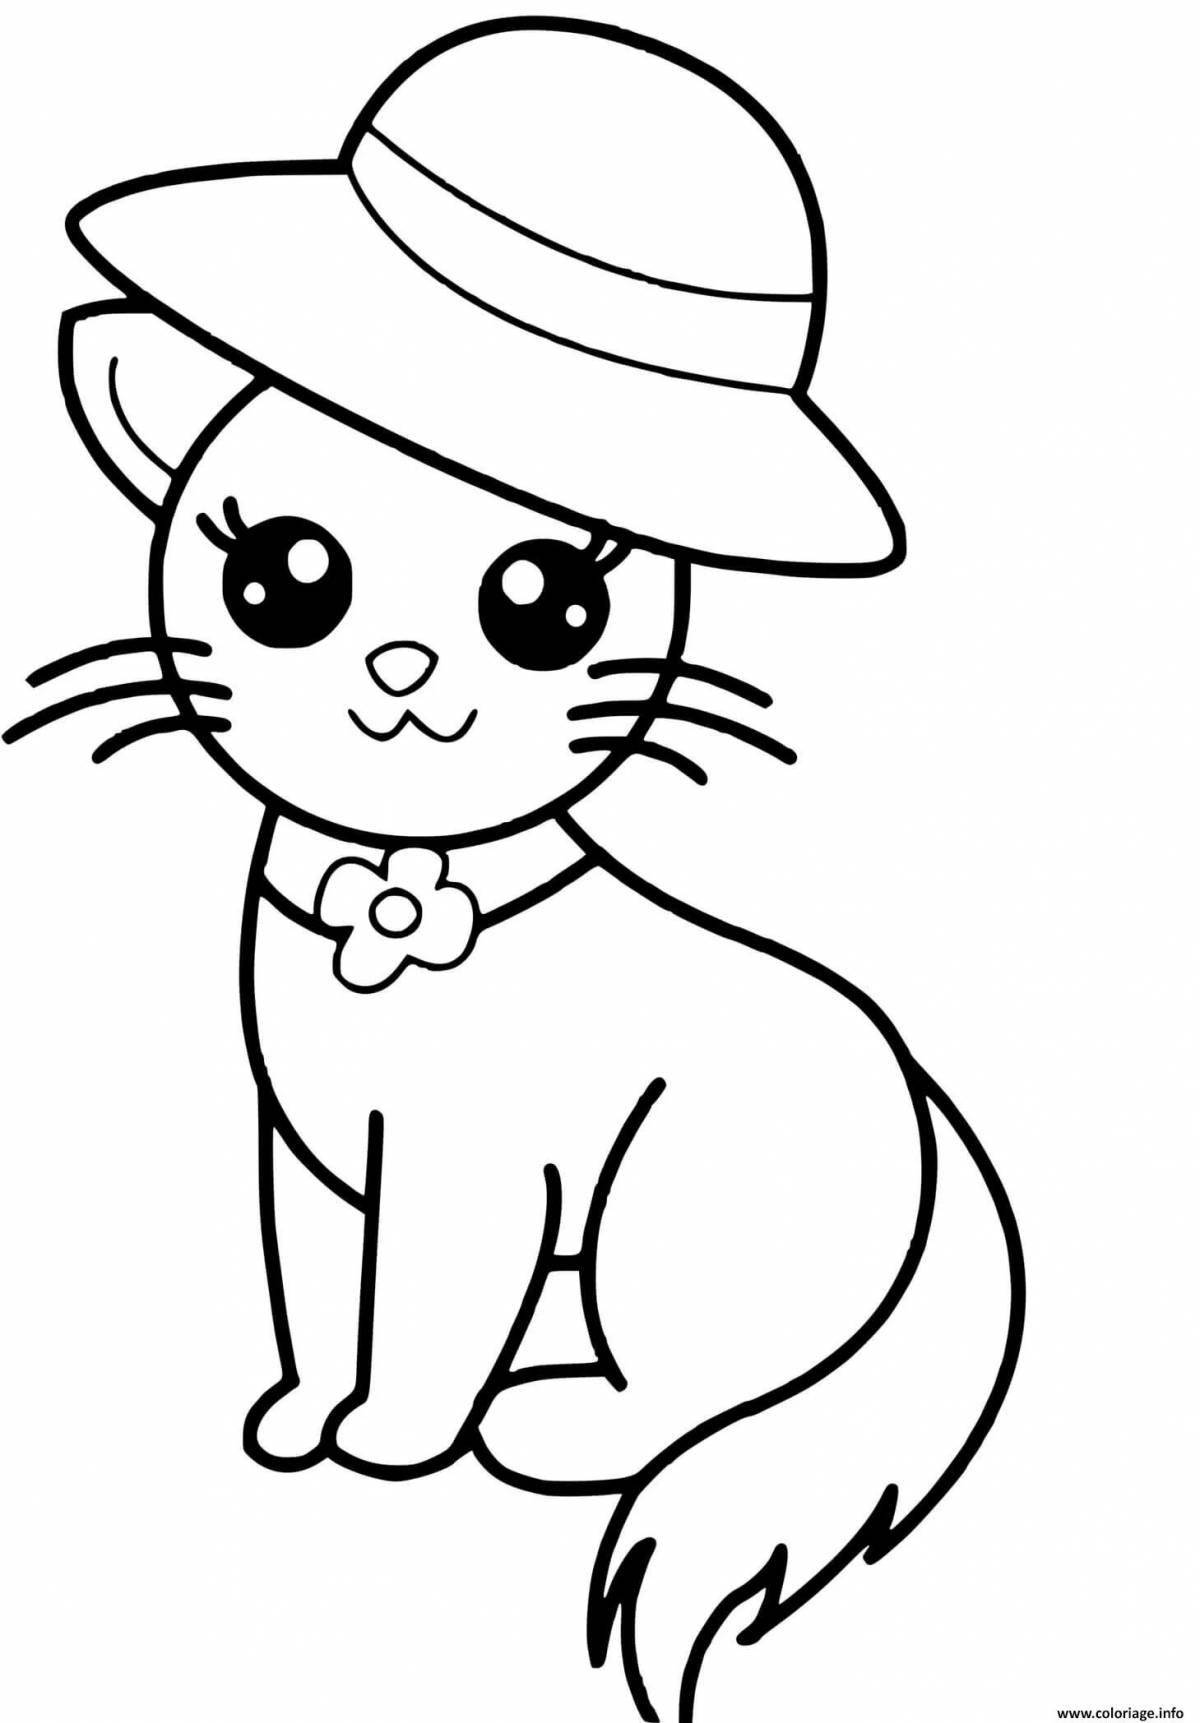 Animated cat coloring book for children 2-3 years old